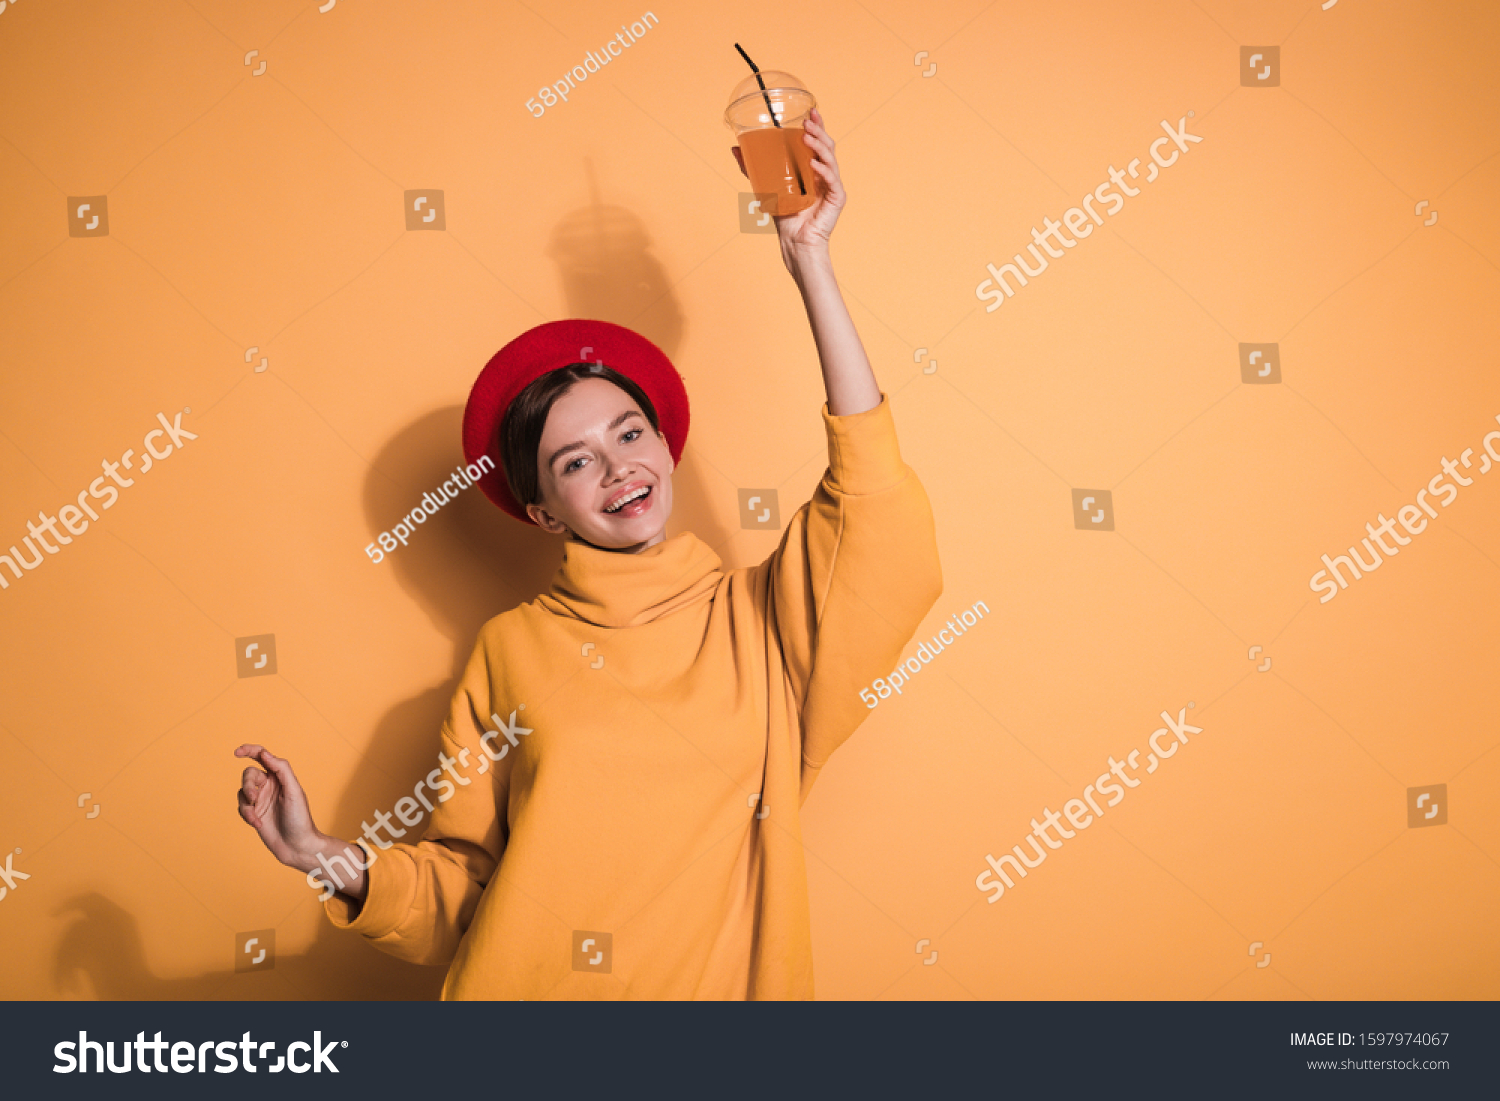 Cheerful playful young woman posing on camera alone. Hold drink in one hand. Look straight and smile. Wear red beret and stylish sweater. Isolated over yellow background #1597974067